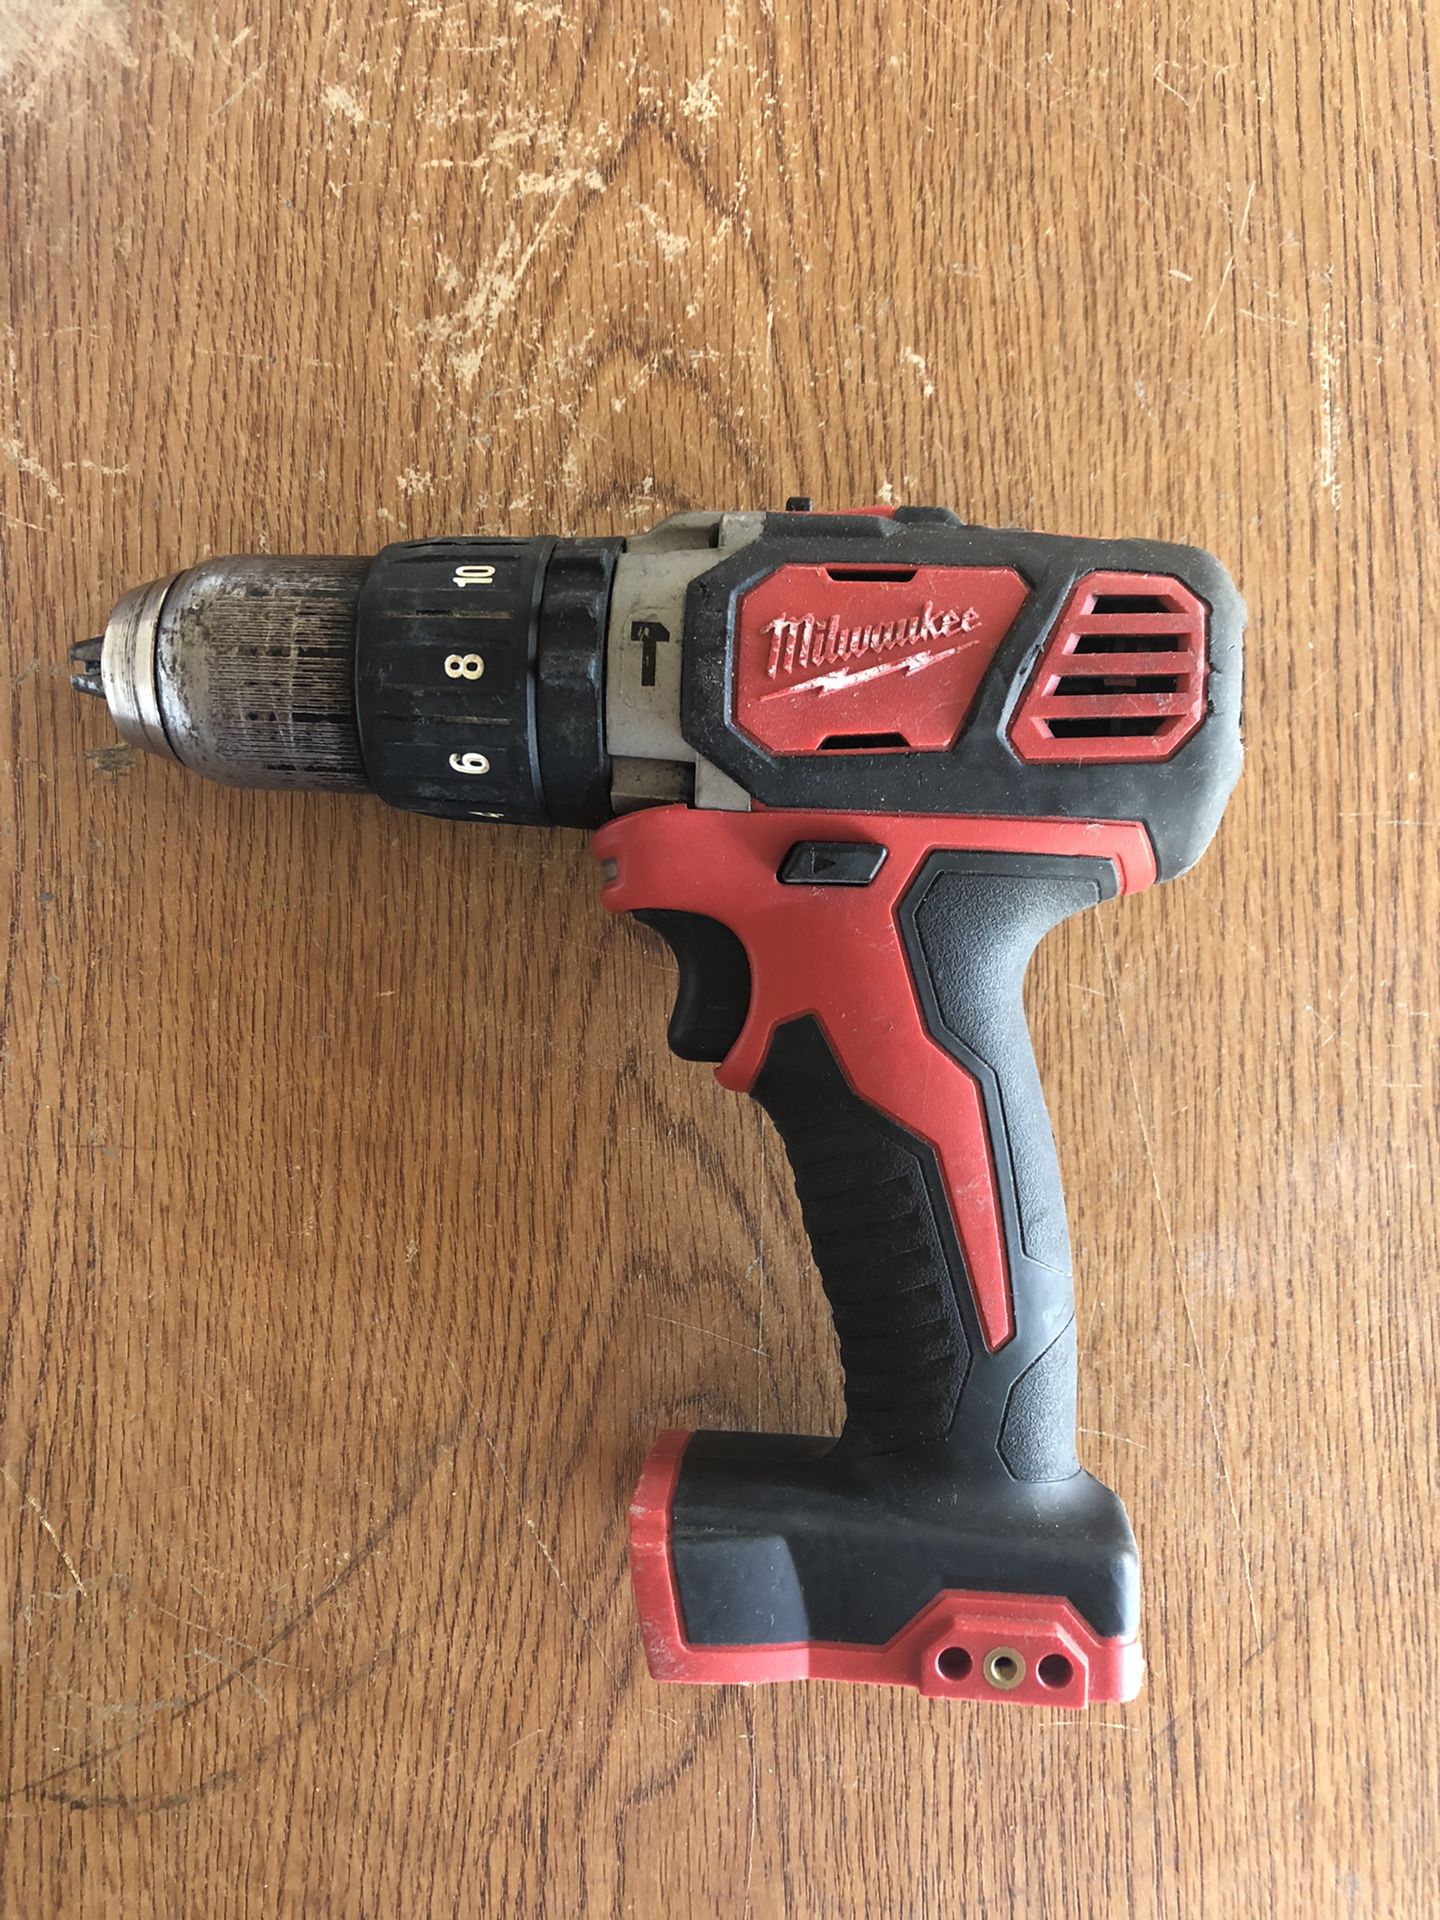 Milwaukee 2704-20 M18 1/2” Compact Hammer Drill / Driver (Ref.39)